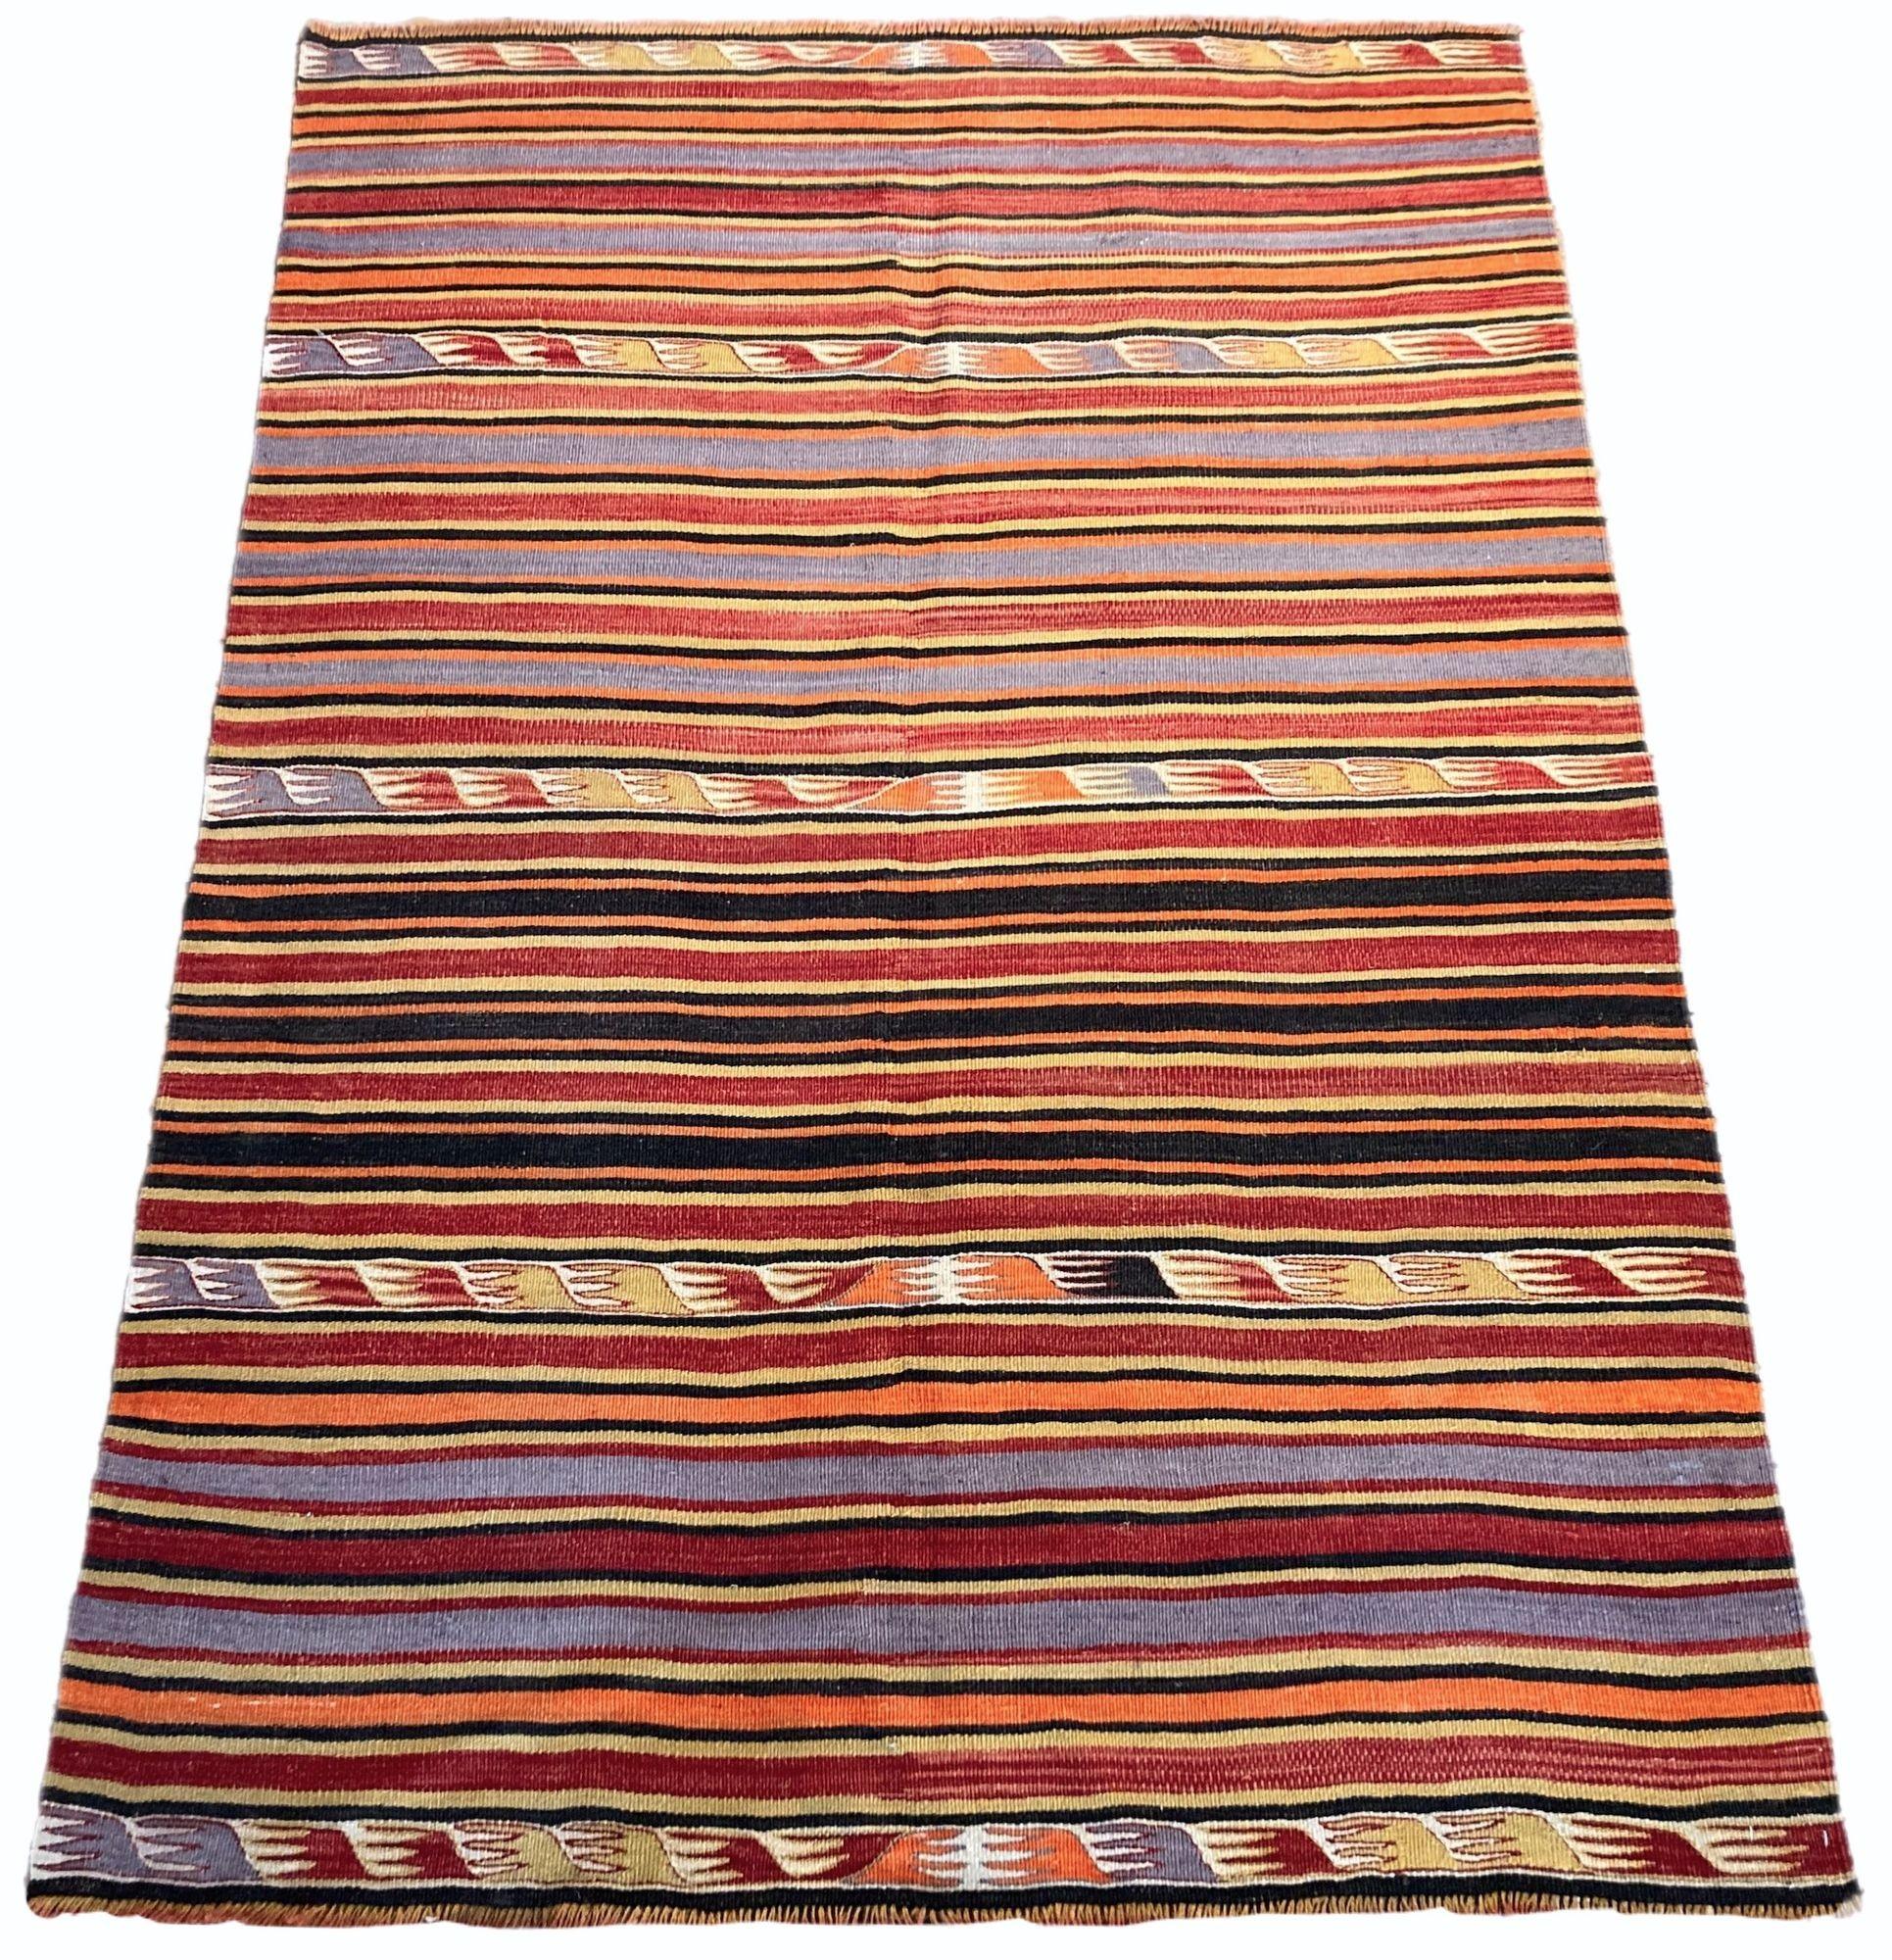 A beautiful vintage kilim, handwoven in central Turkey circa 1960 featuring a traditional multicoloured banded design in reds, blues and golds.
Size: 1.92m x 1.38m (6ft 4in x 4ft 6in)
This kilim is in good condition with light, age related wear.